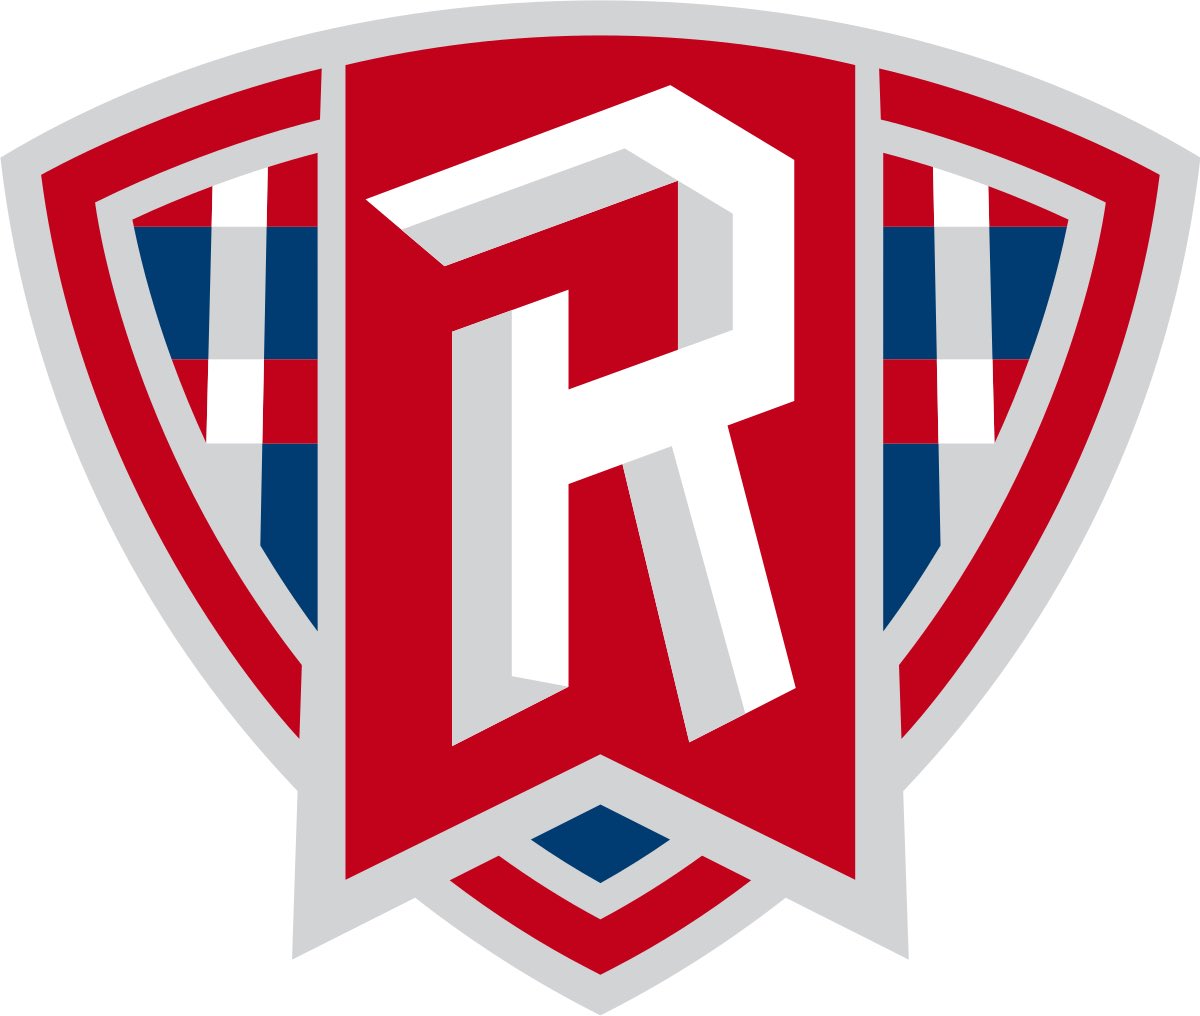 After a great conversation with @coachmcguire, I am humbled to receive an offer to continue my academic and athletic careers at Radford University. Thanks to @Radford_WBB for showing confidence in me. @PGHVirginia @FBCHAVOC @TPLS_LionsGirls @coachmike25 @RasheenJohnson